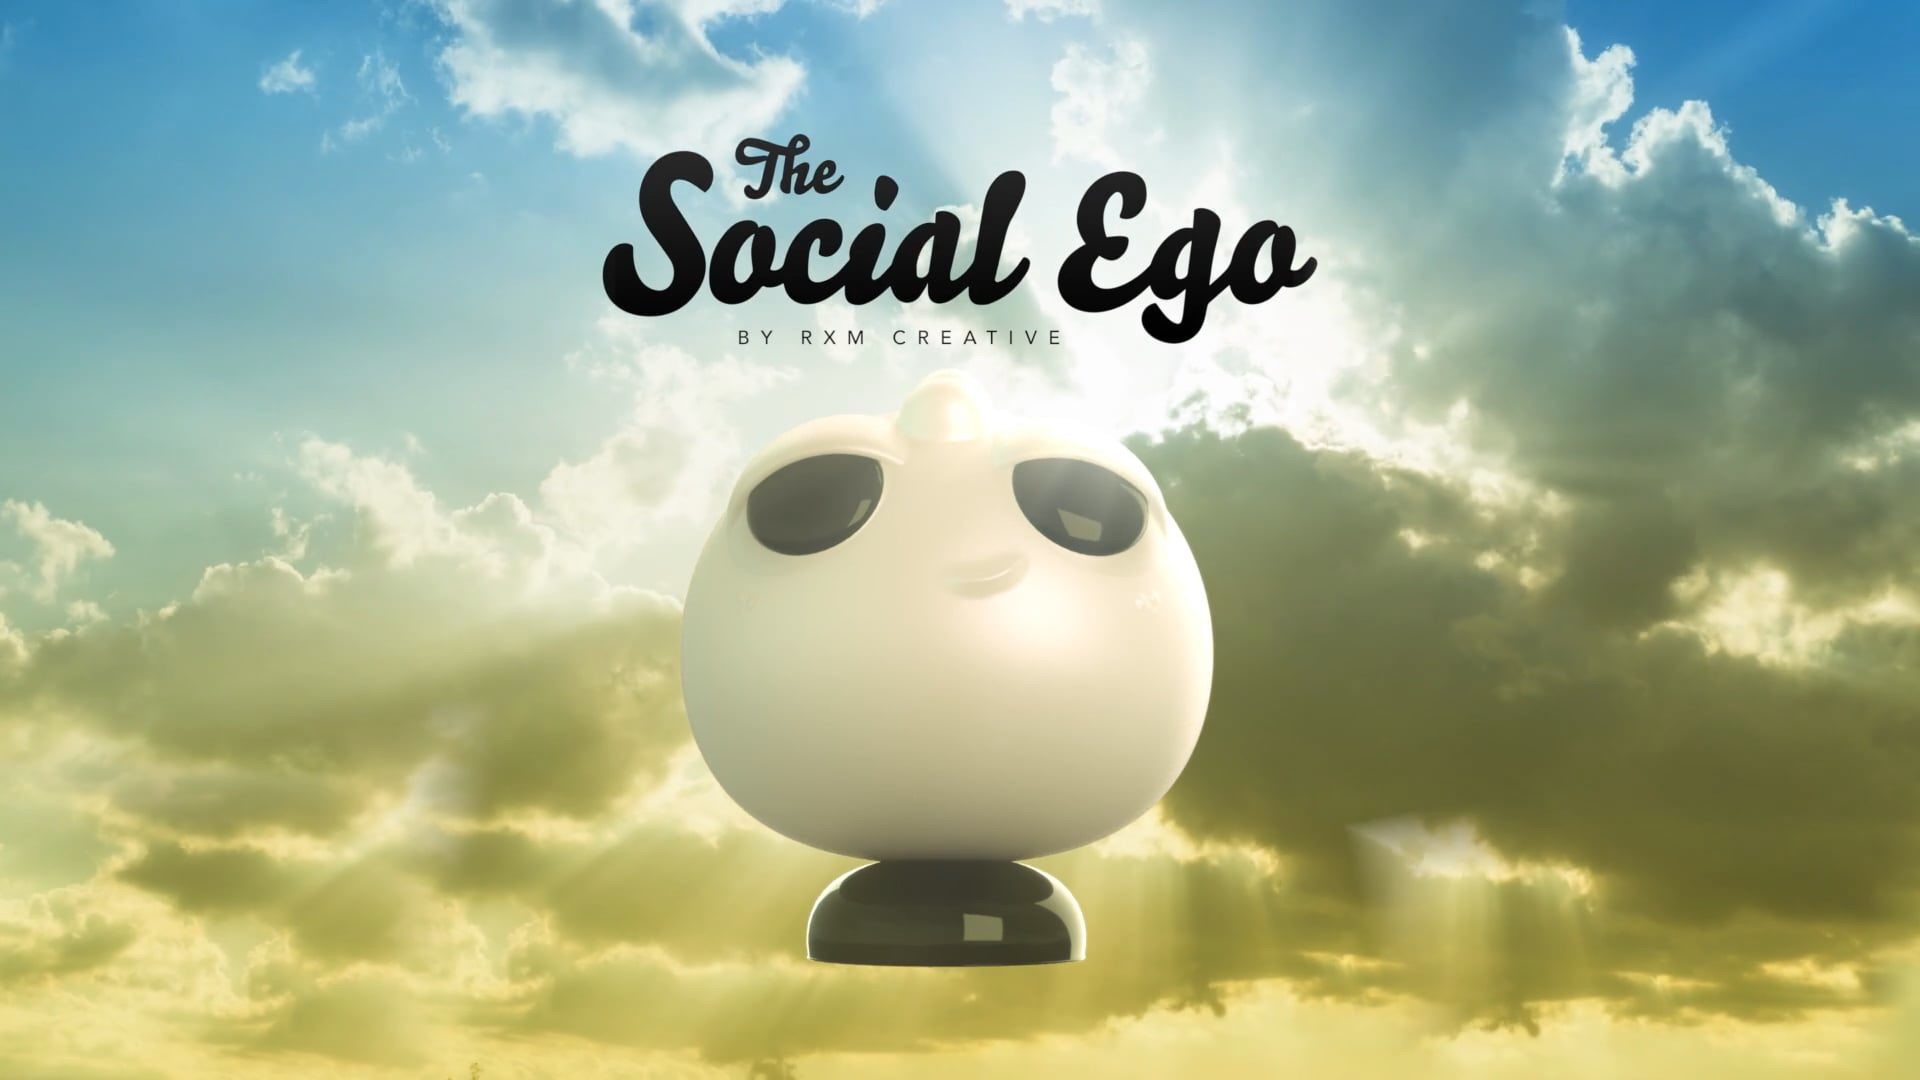 The Social Ego | Promotional Film